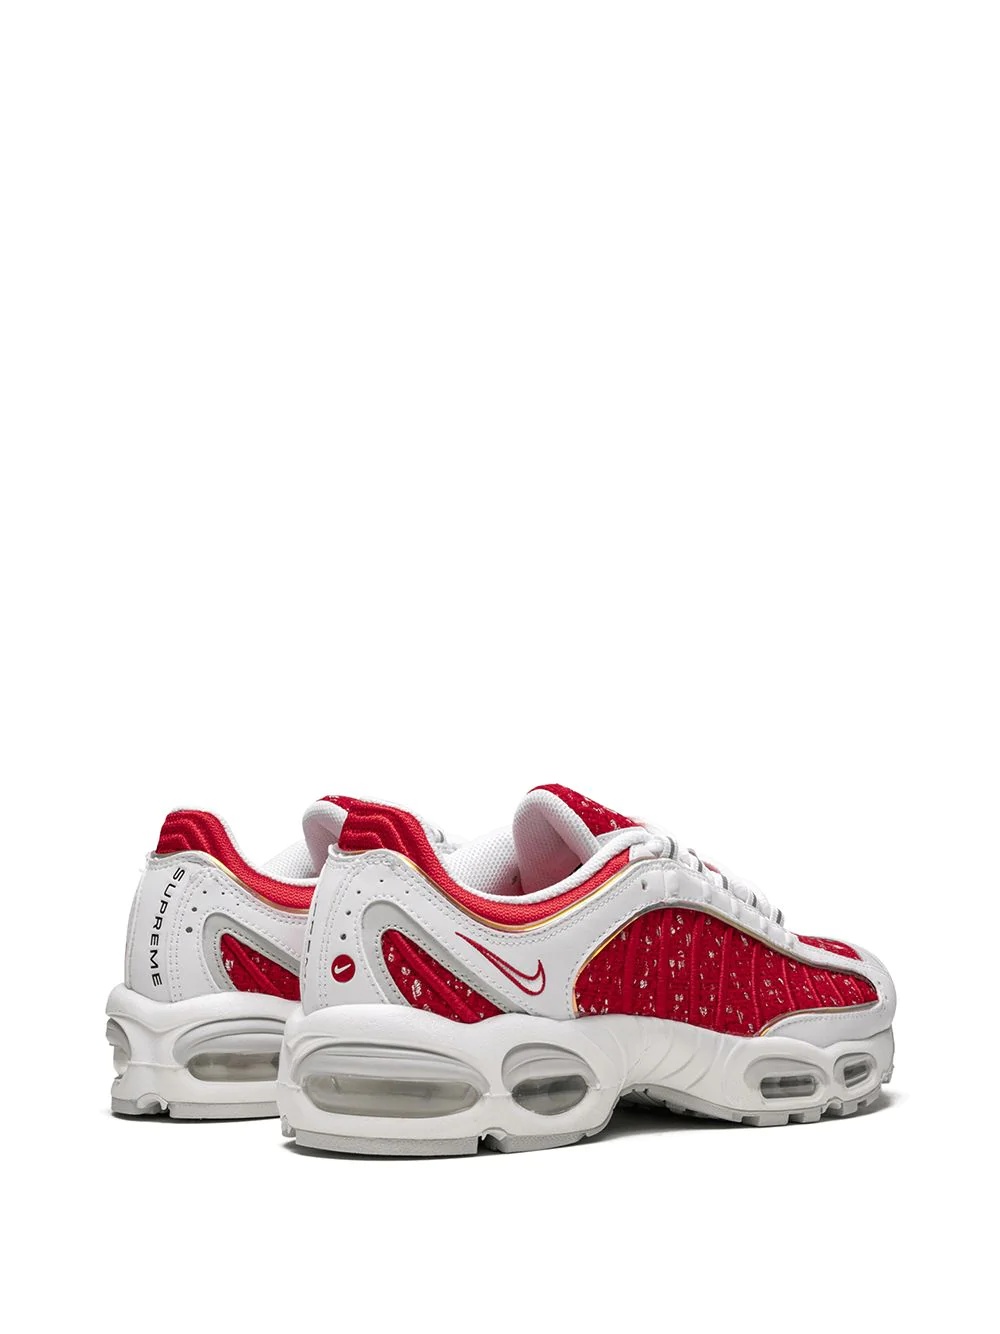 x Supreme Air Max Tailwind 4 sneakers - 3